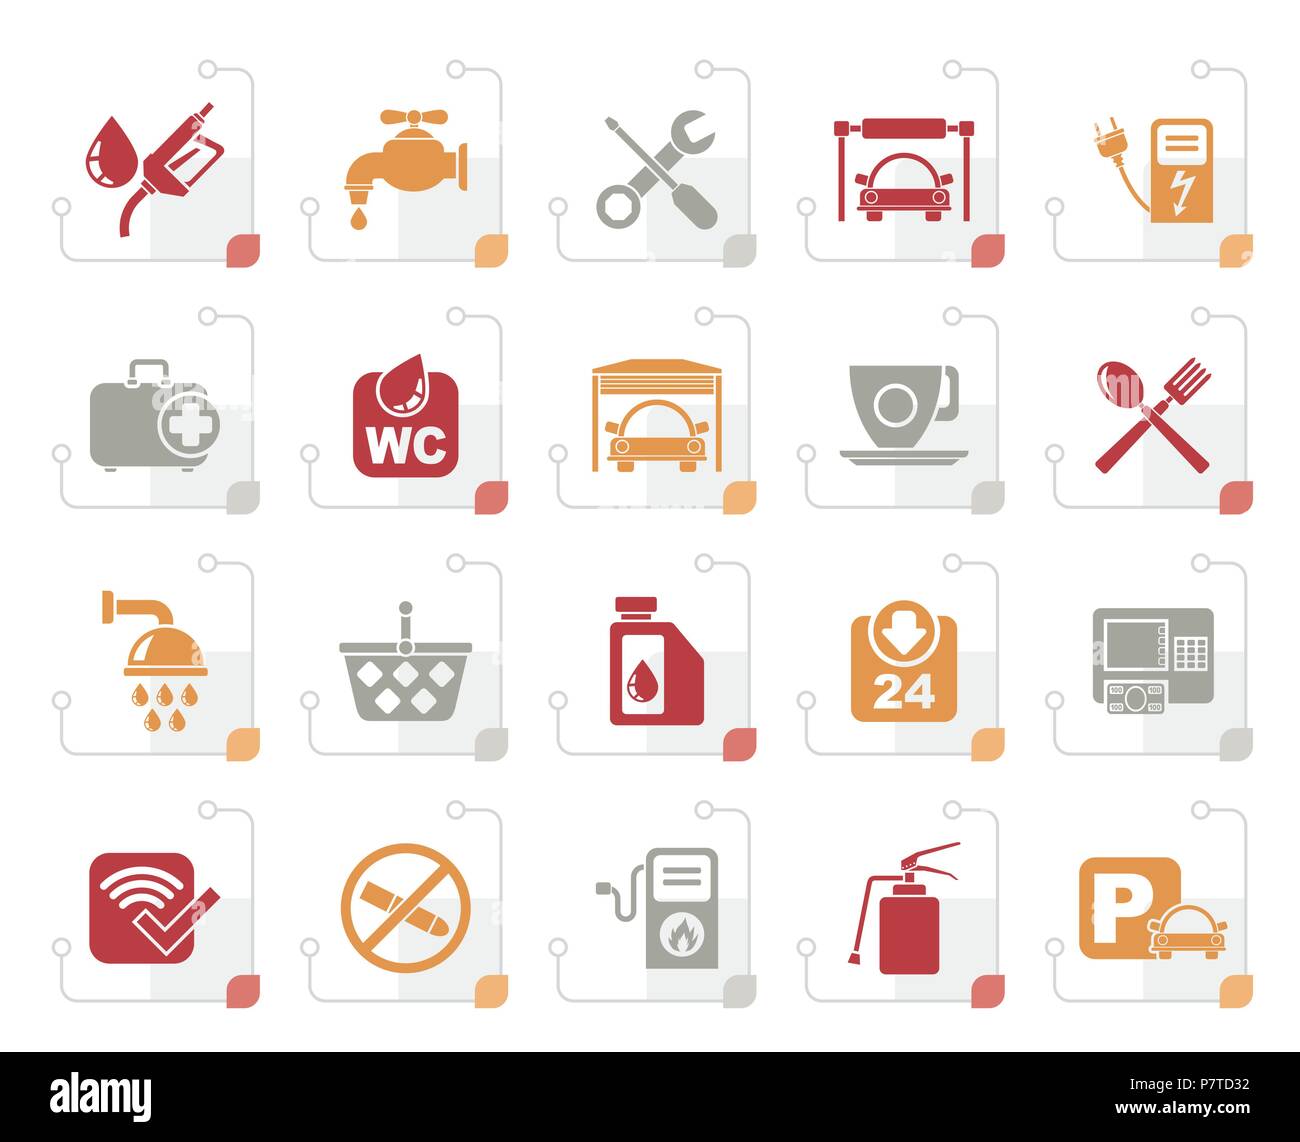 Stylized petrol station icons - vector icon set Stock Vector